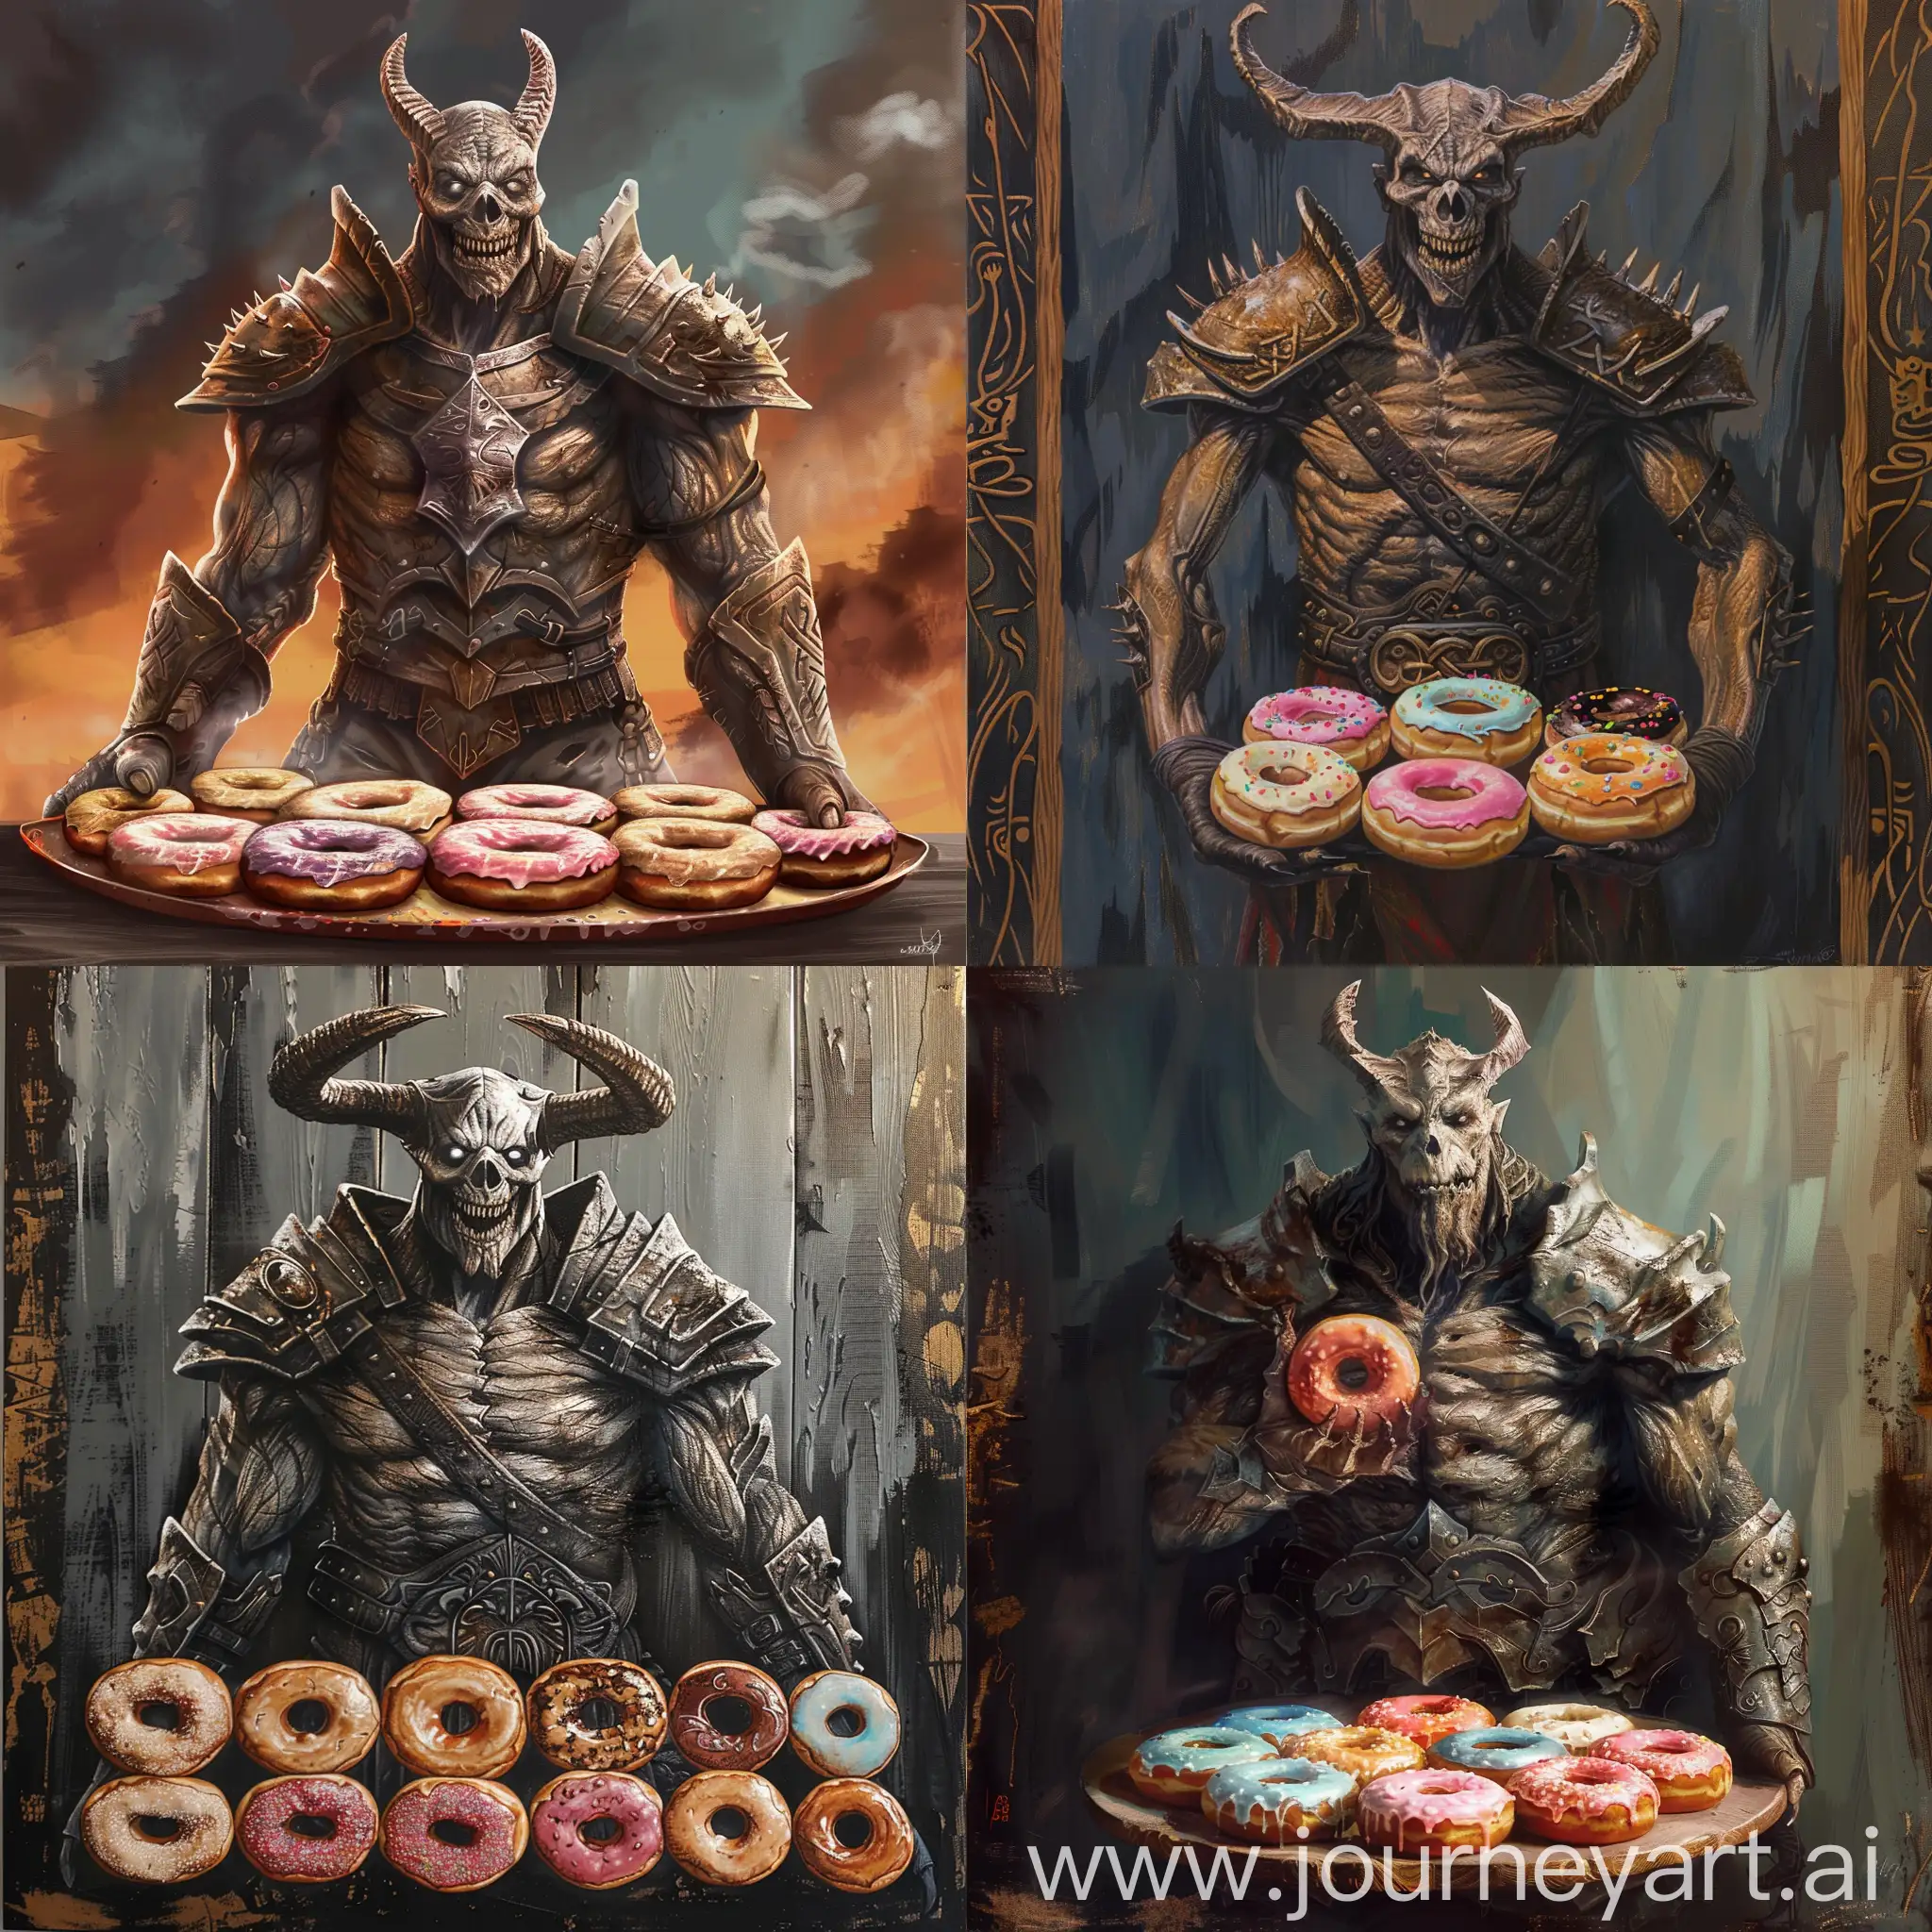 A draugr from Skyrim with a dozen donuts